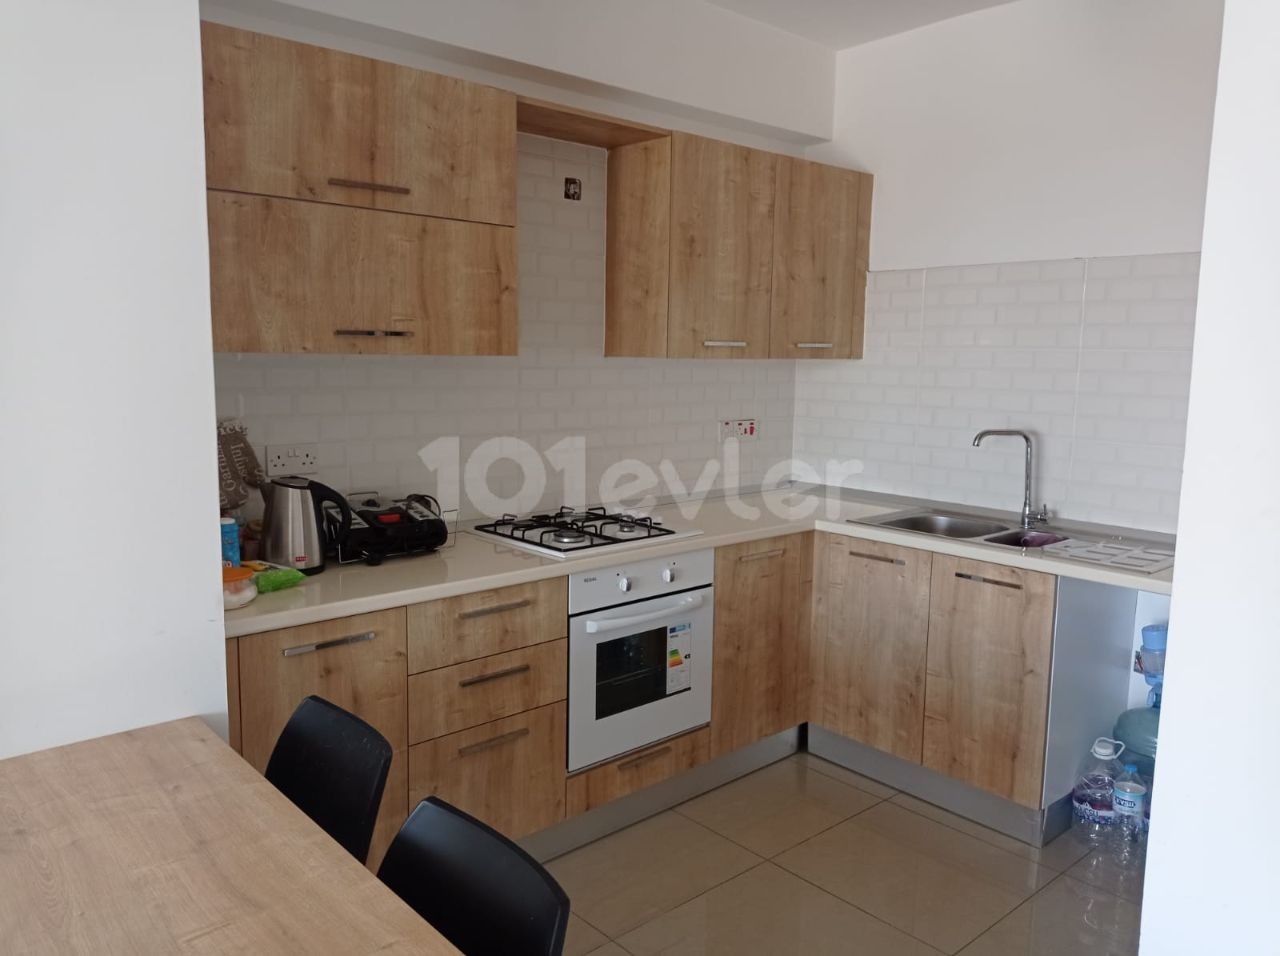 Fully furnished 2 + 1 apartment for rent in Gönyeli central location. (It will be available on March 6.)